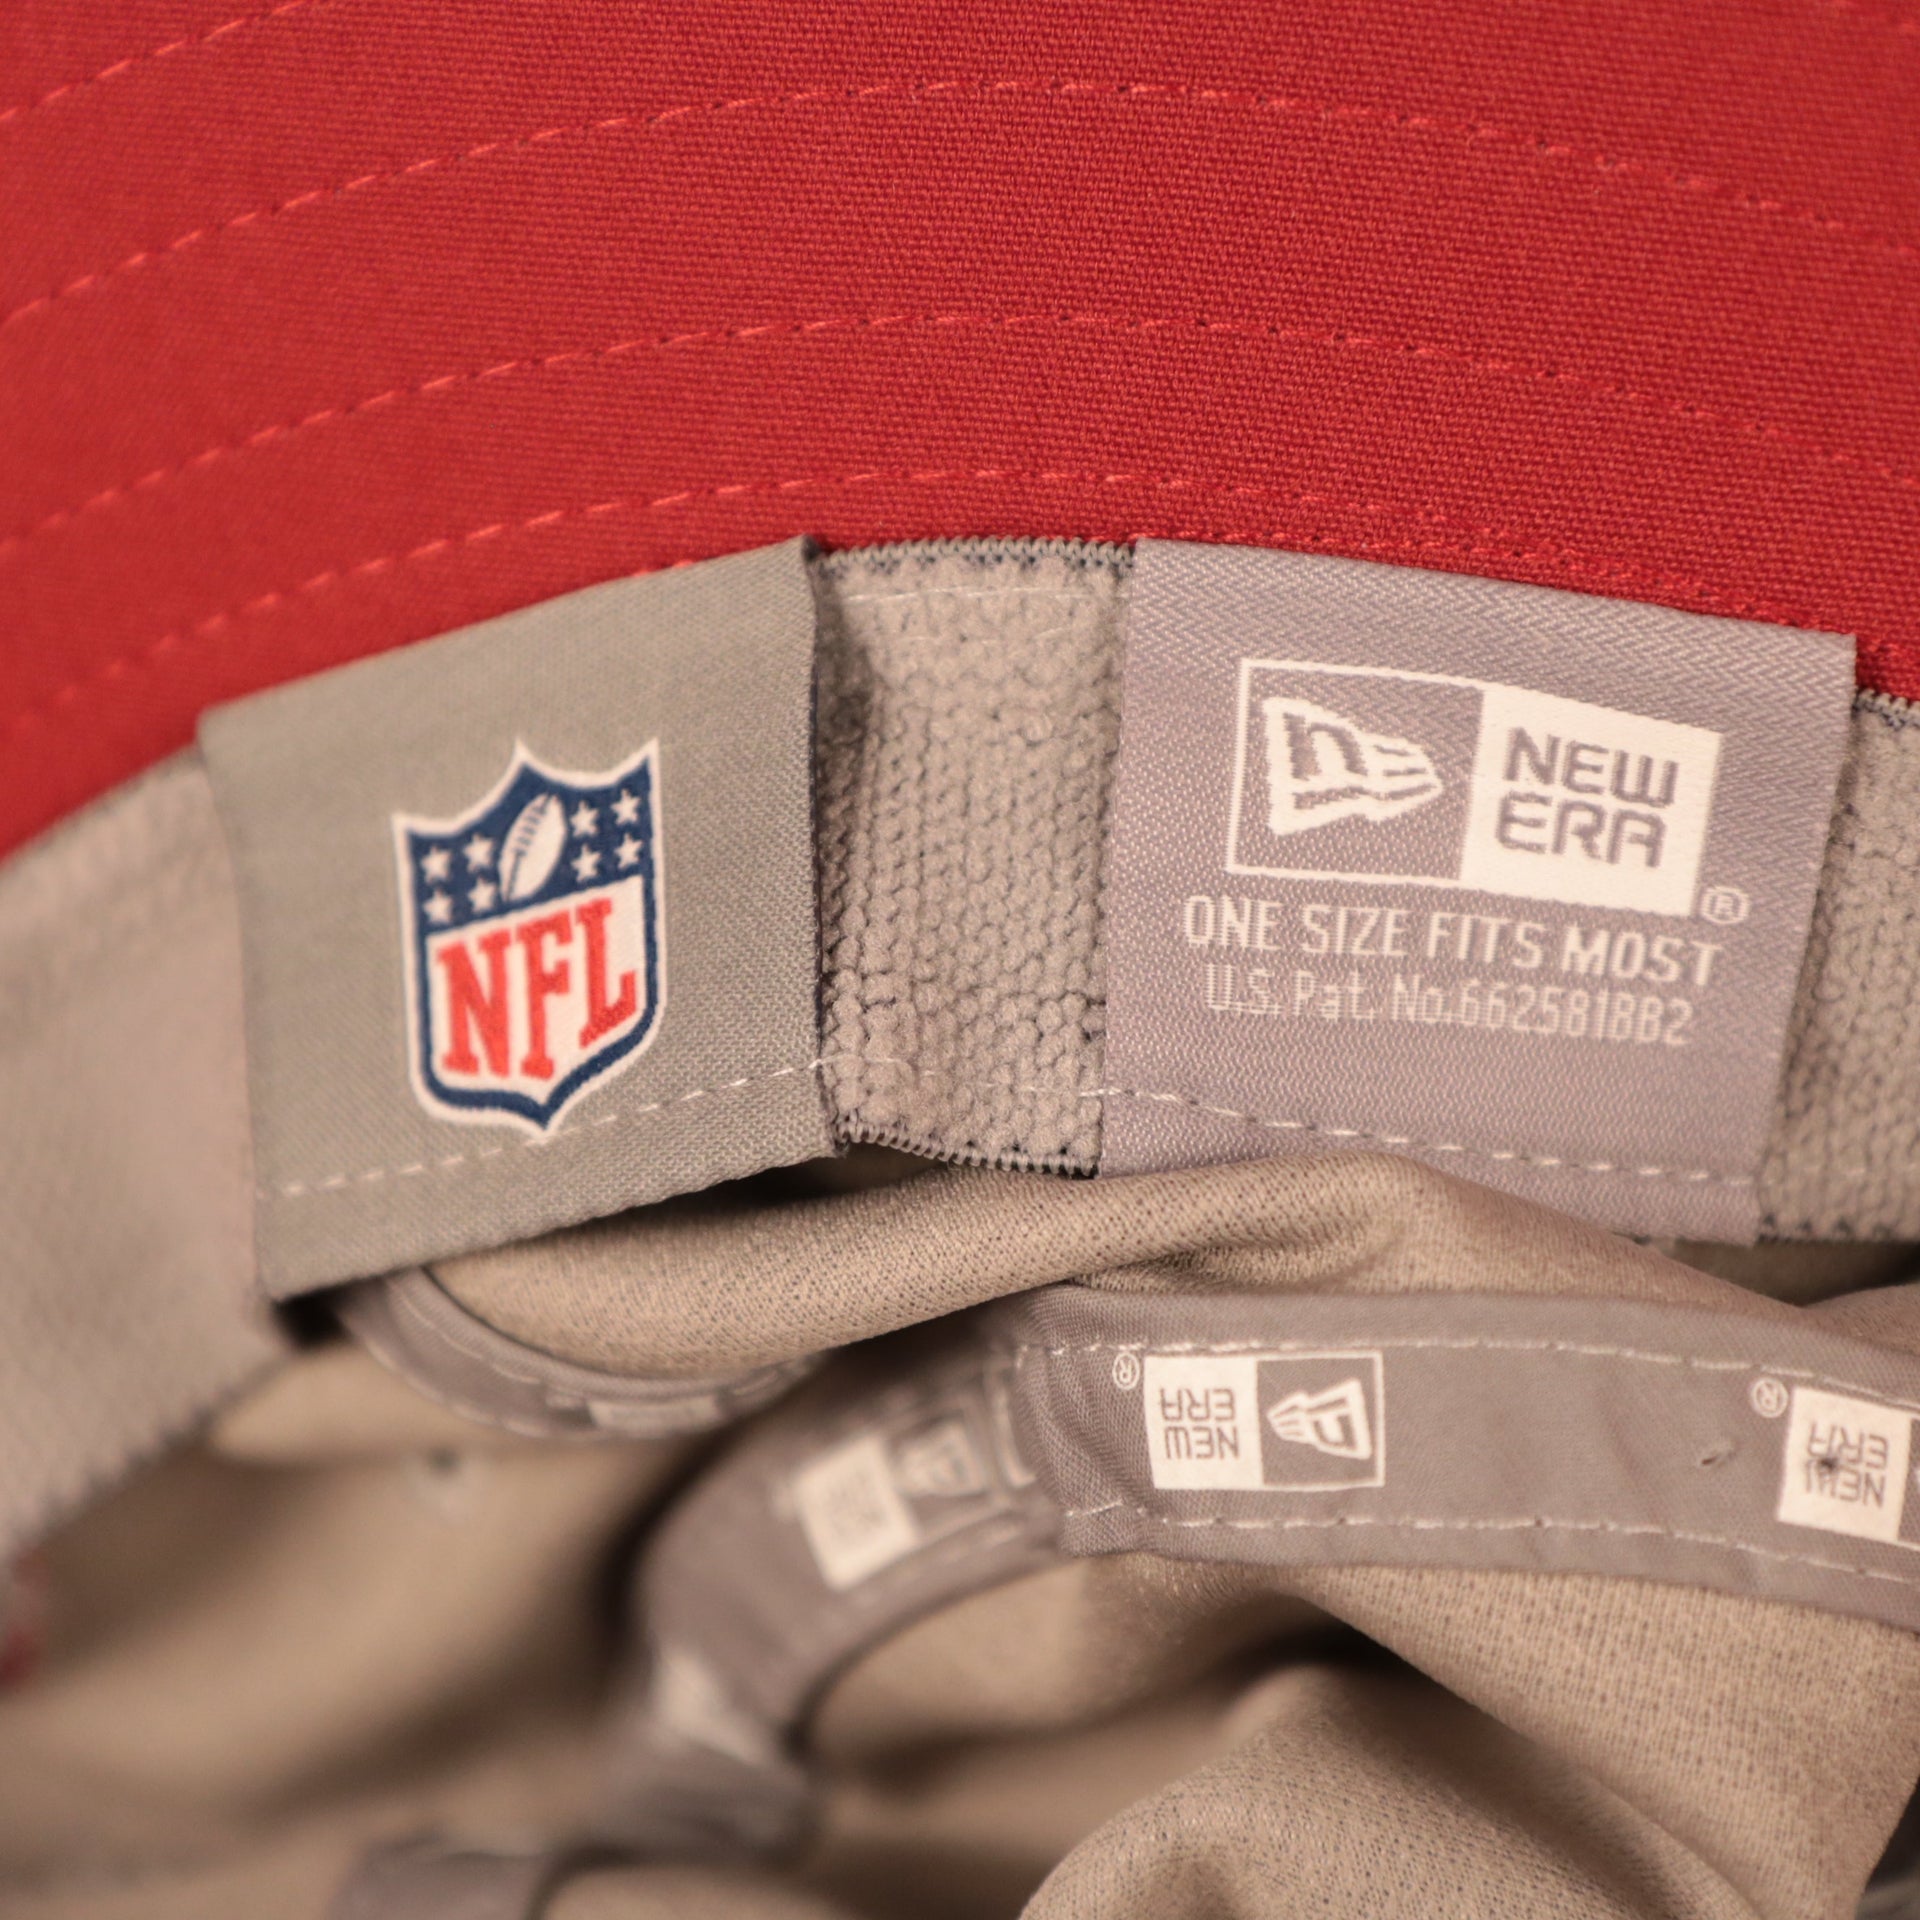 The NFL and new era tag on the inside of the gray Arizona Cardinals 2021 nfl training bucket hat by New Era.